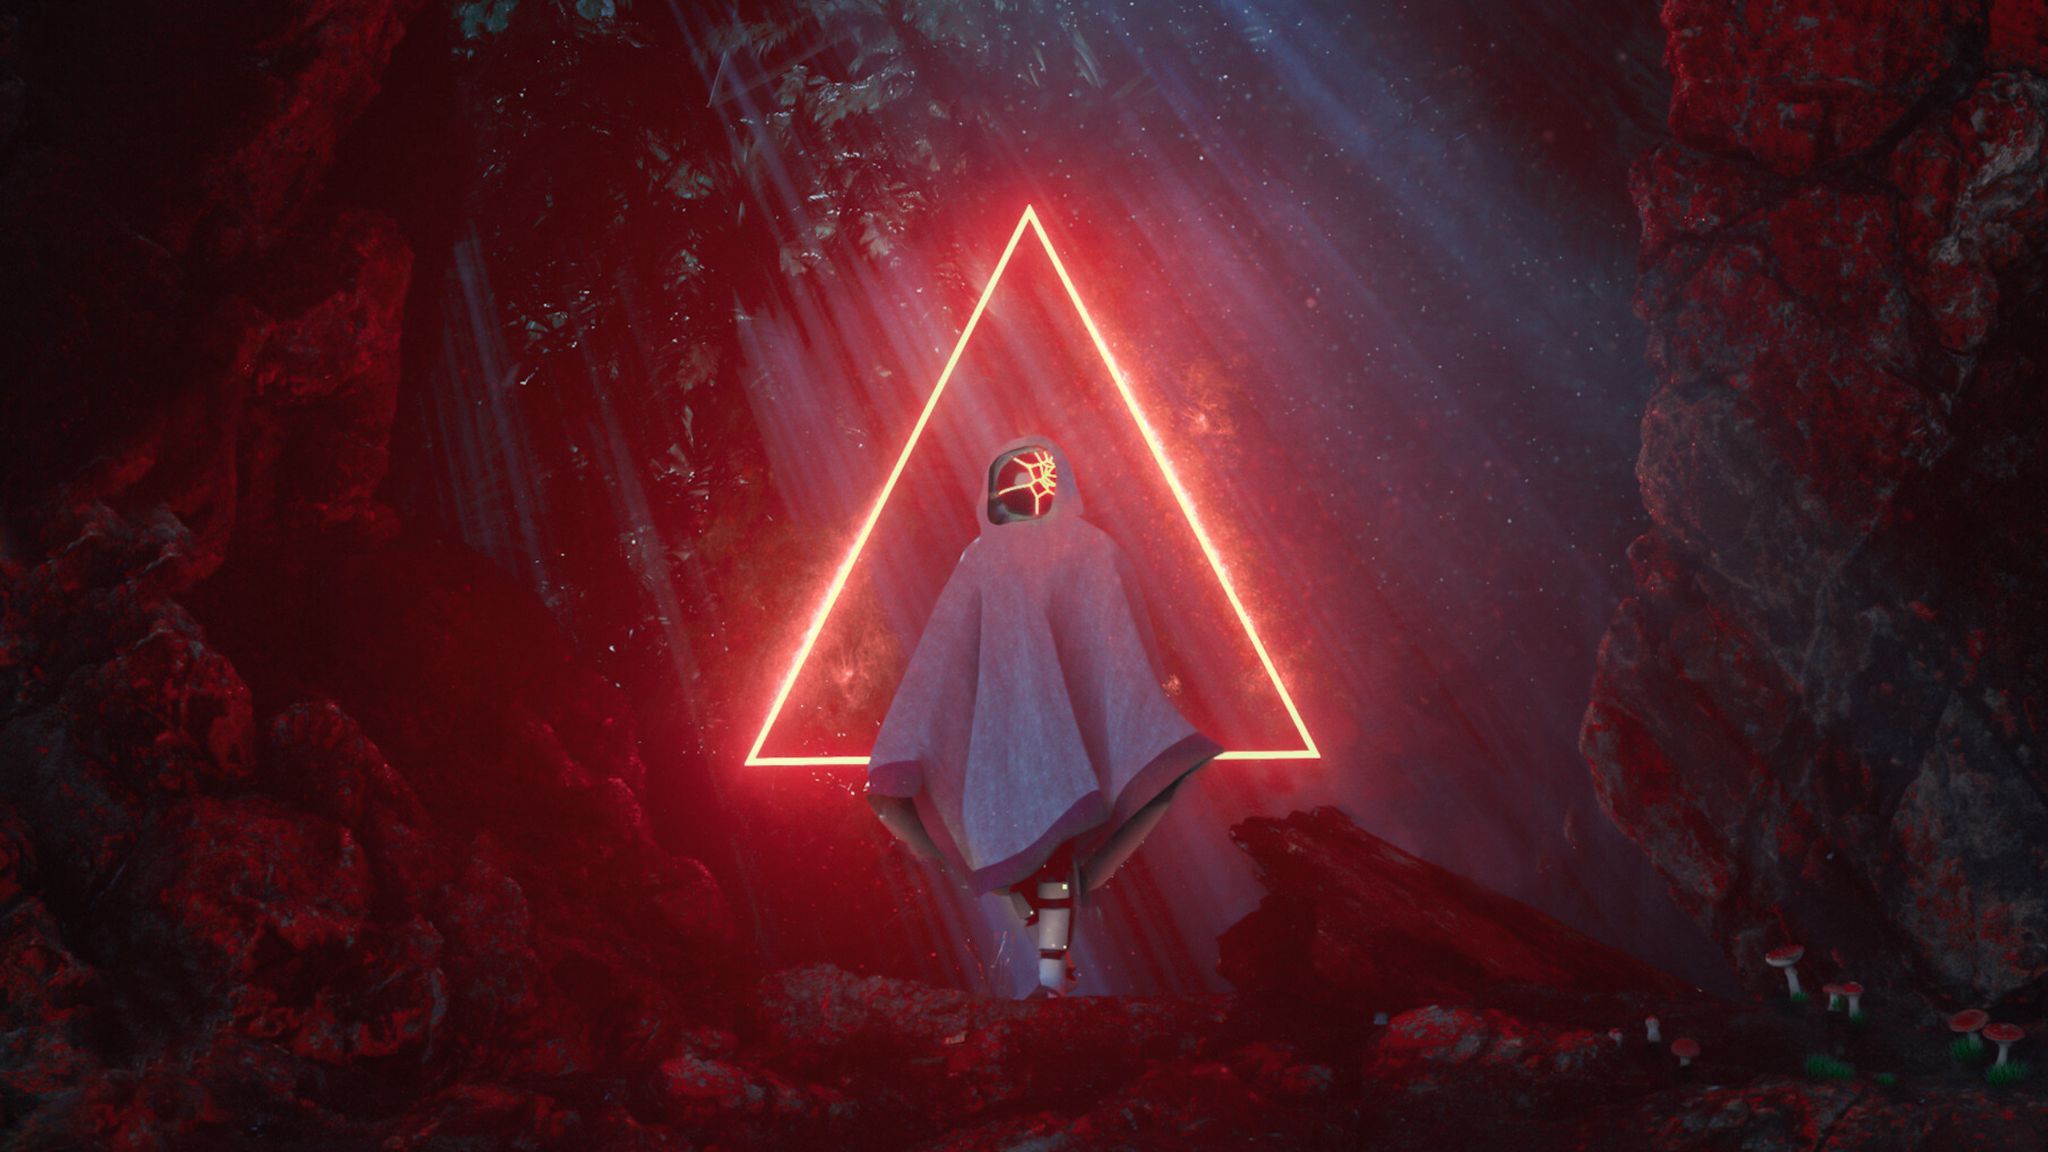 Download wallpaper 2048x1152 ghost, triangle, glow, red, cave, light ultrawide monitor HD background